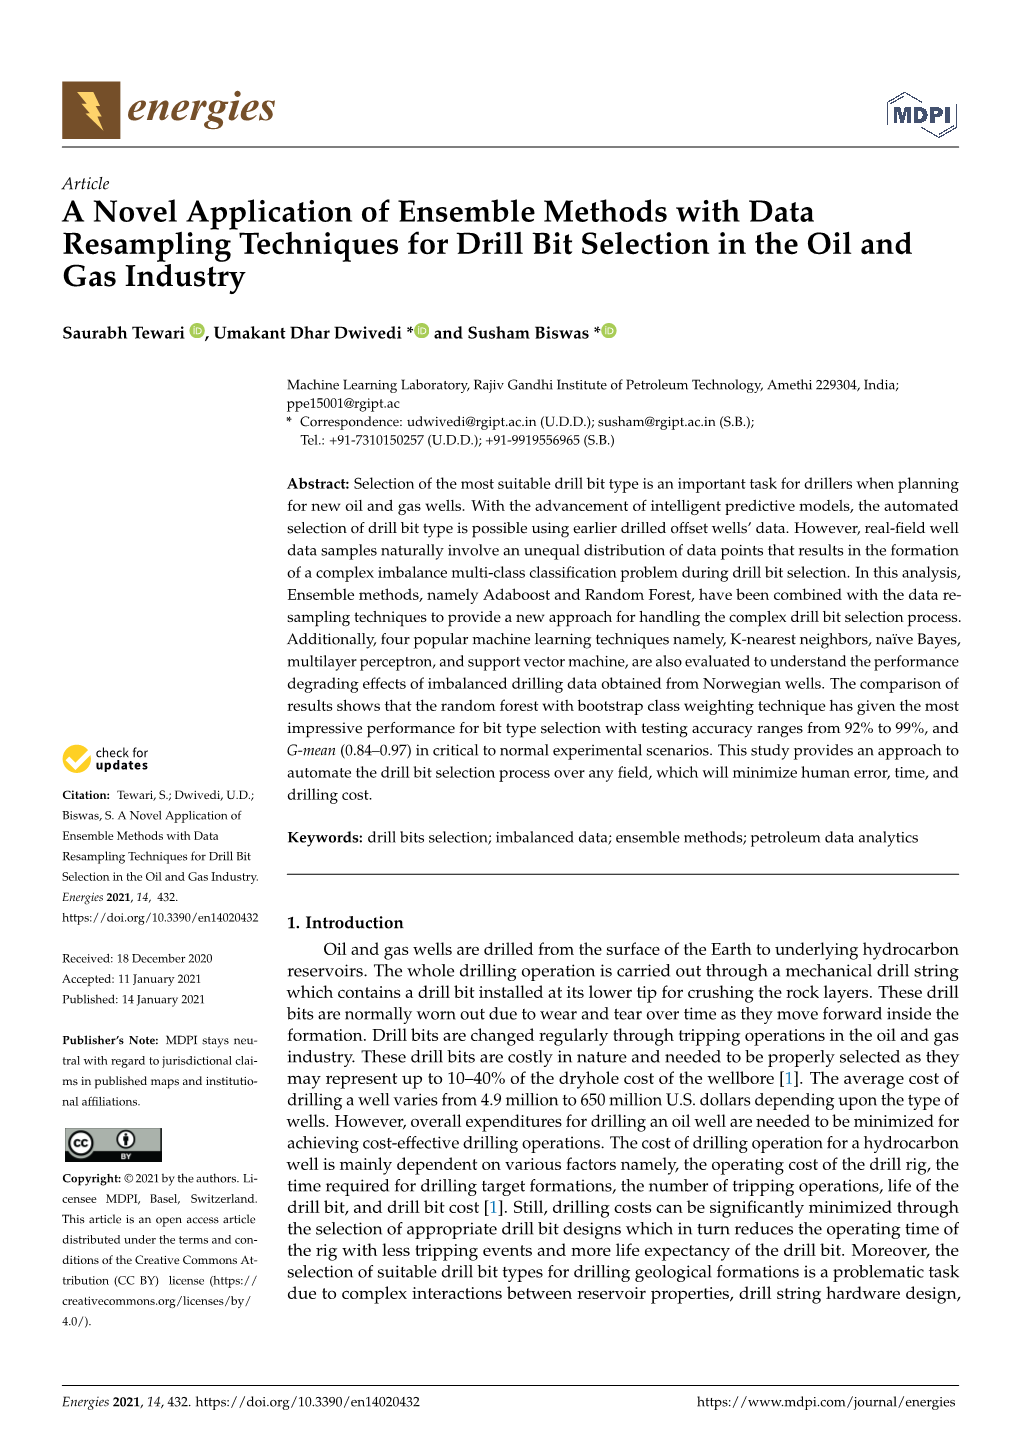 A Novel Application of Ensemble Methods with Data Resampling Techniques for Drill Bit Selection in the Oil and Gas Industry